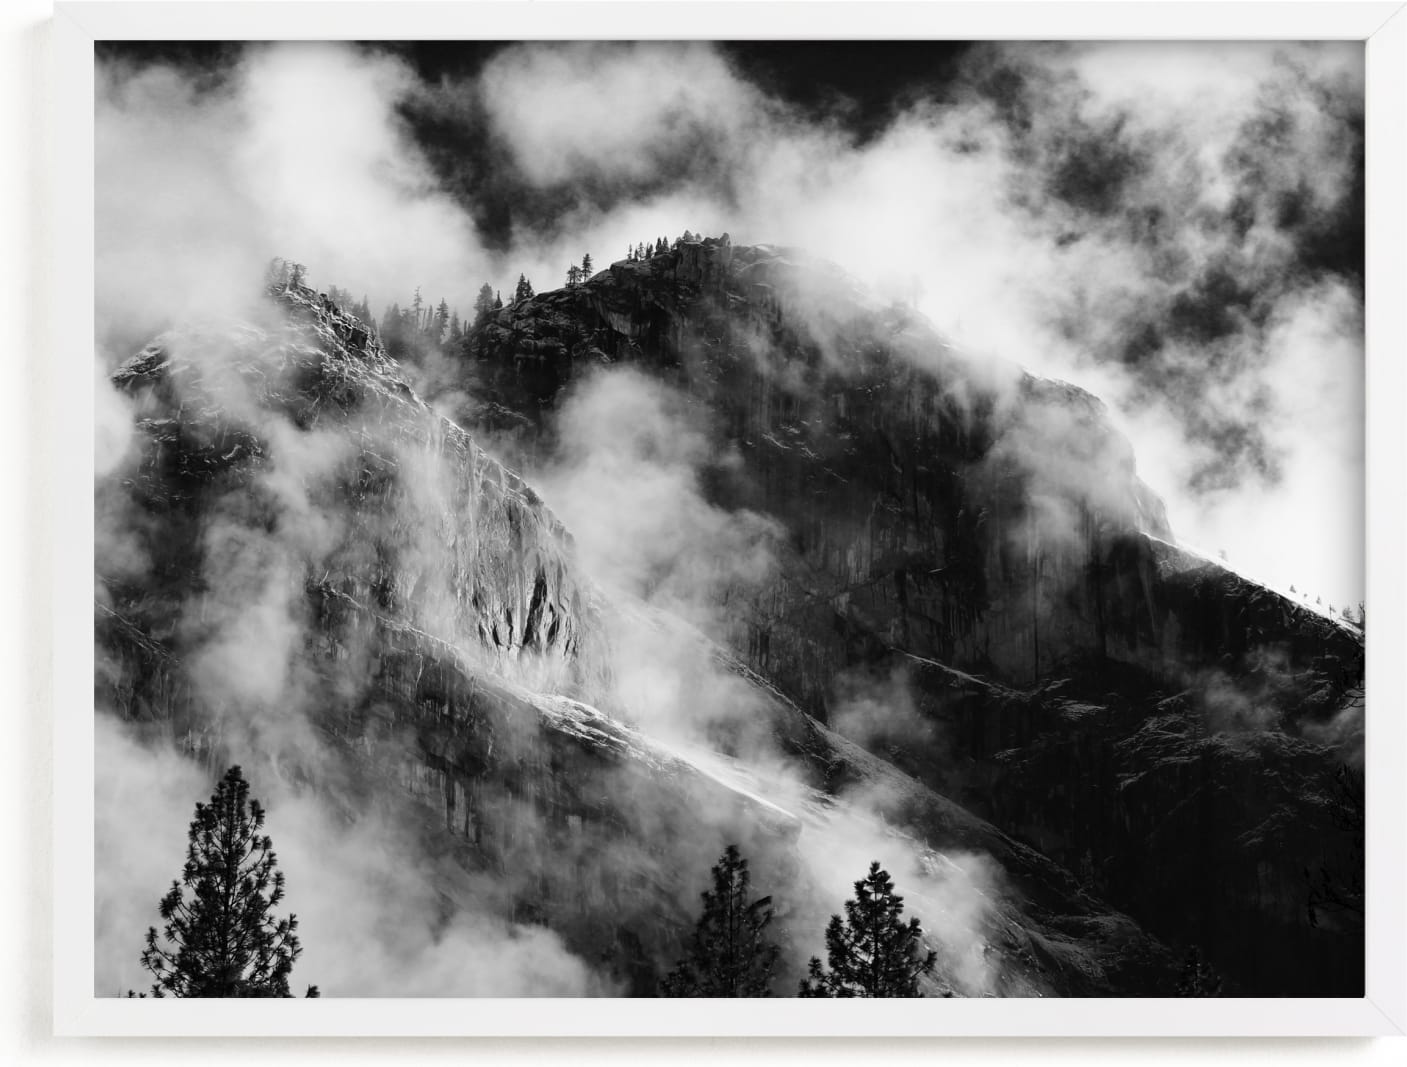 This is a black and white art by Elise Akerson called Clouds/Yosemite.